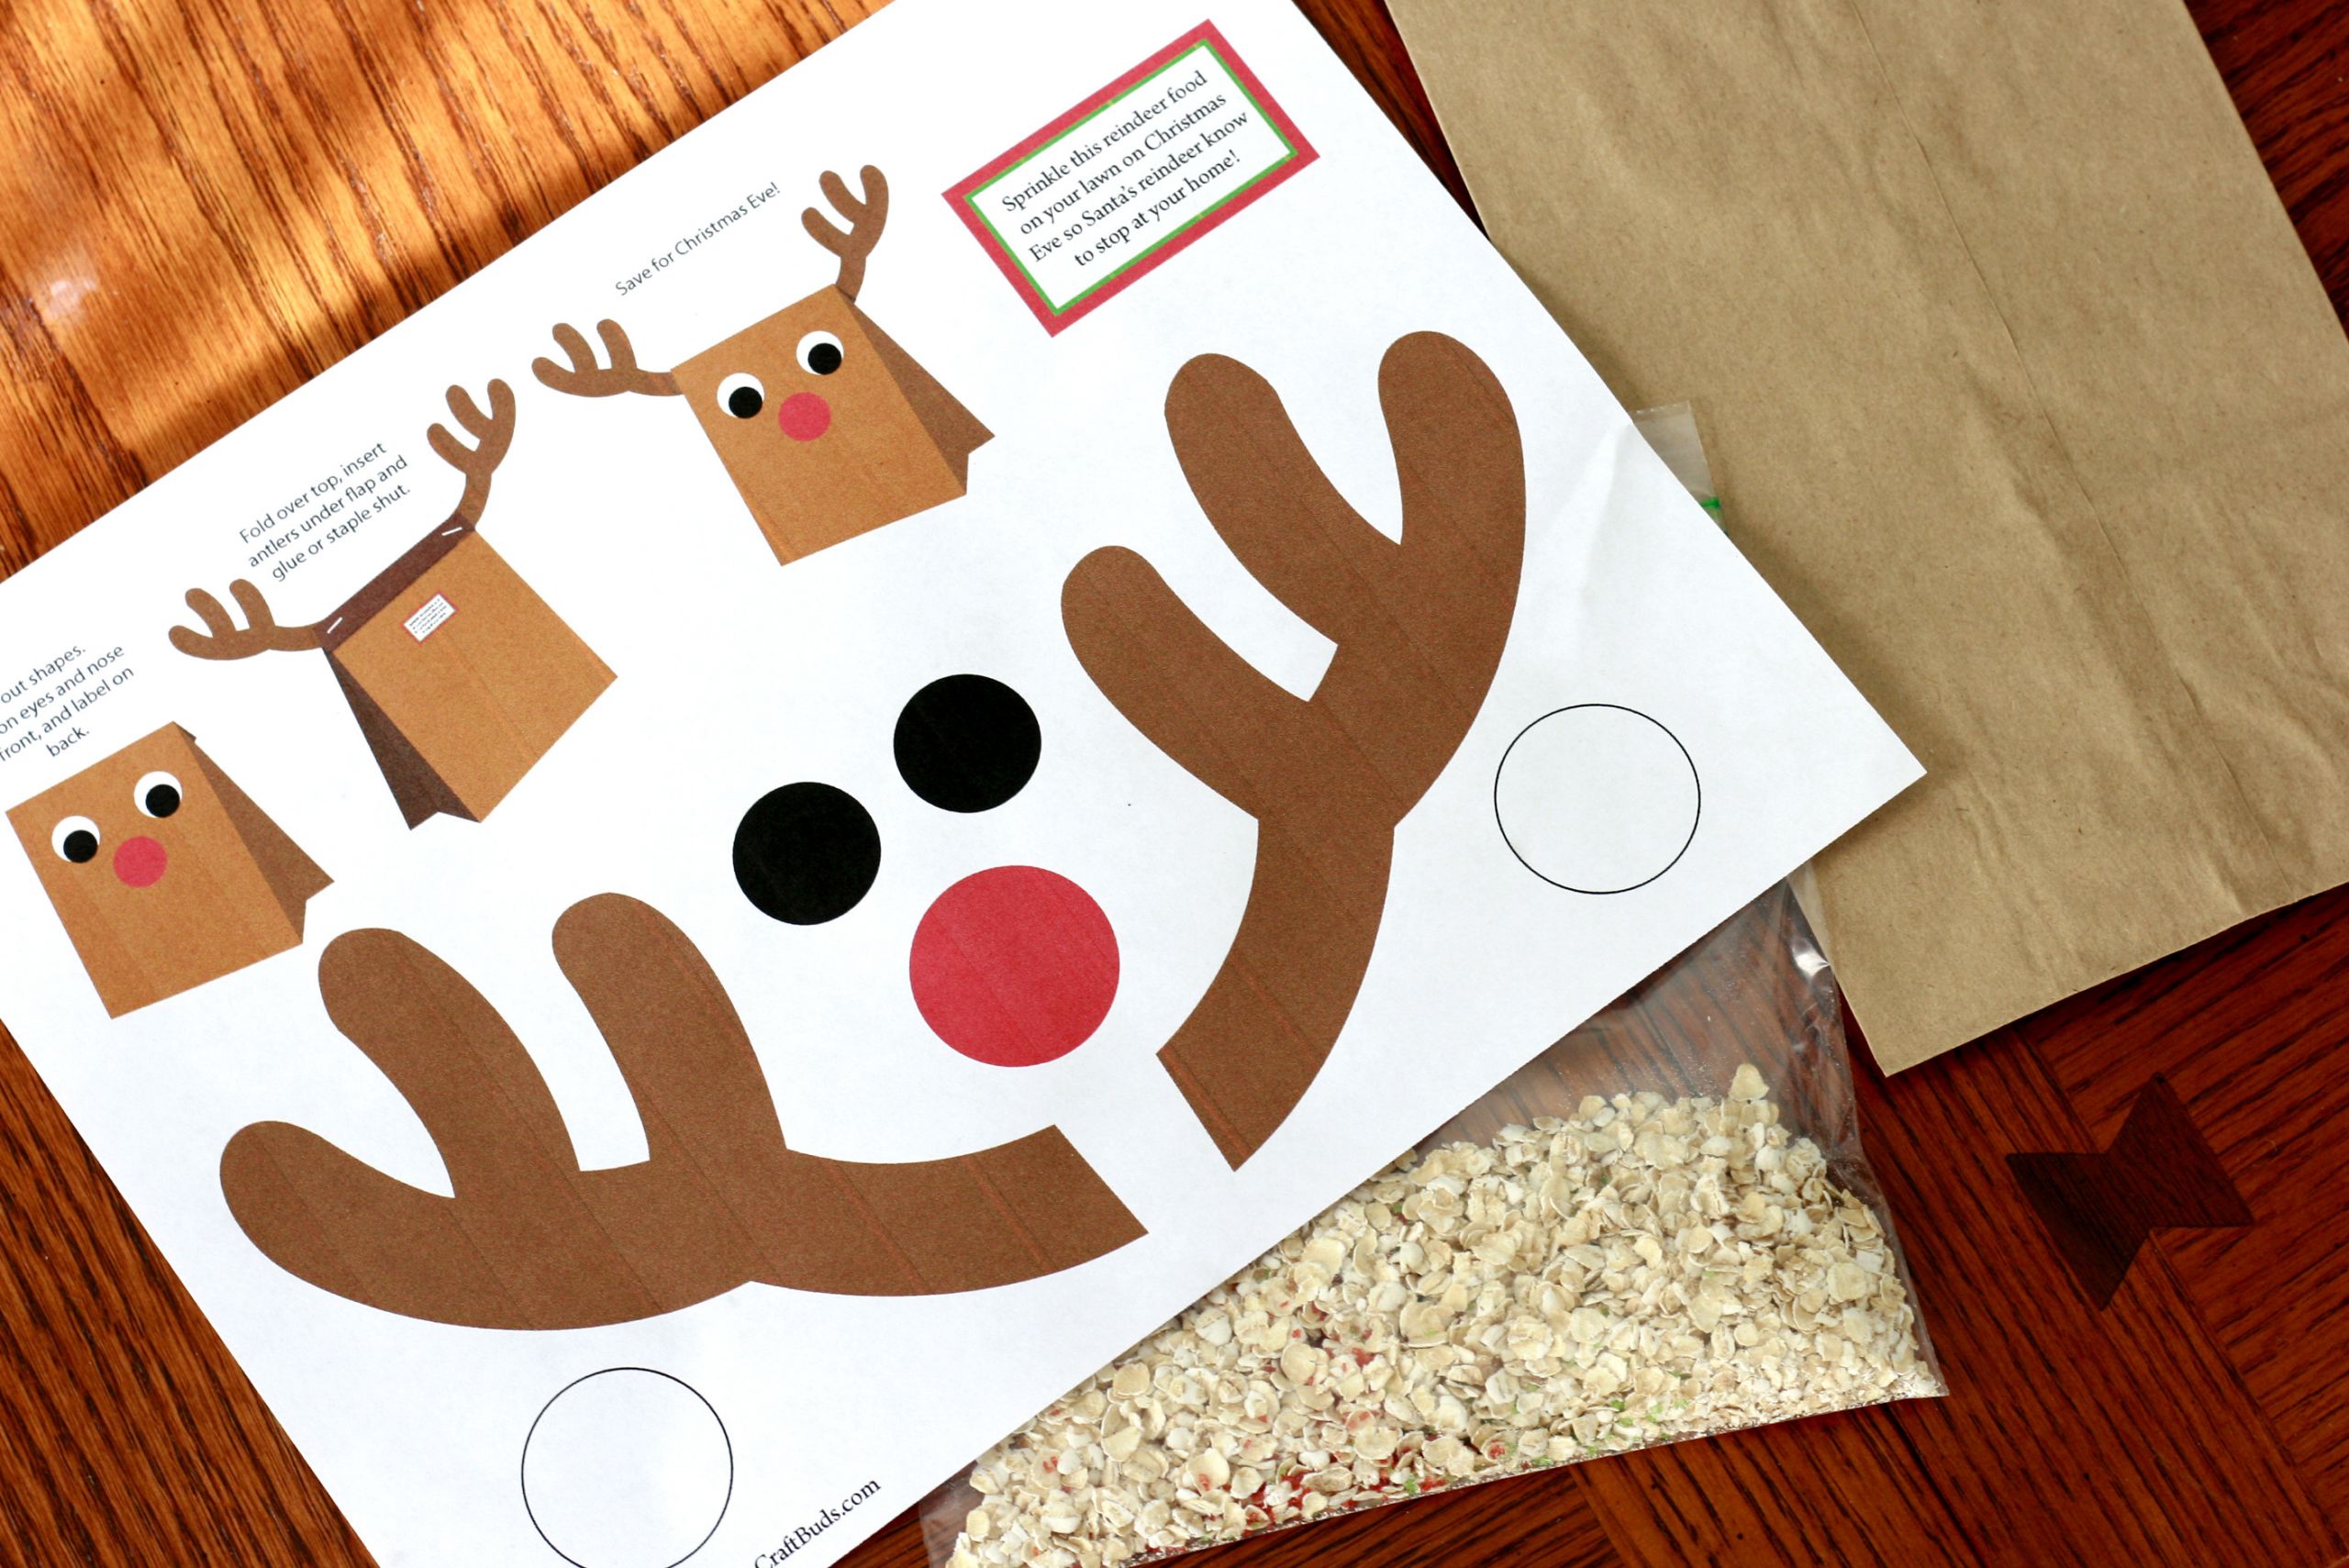 Holiday Gift Crafts Ideas
 Last Minute Christmas Gifts for Kids and Adults